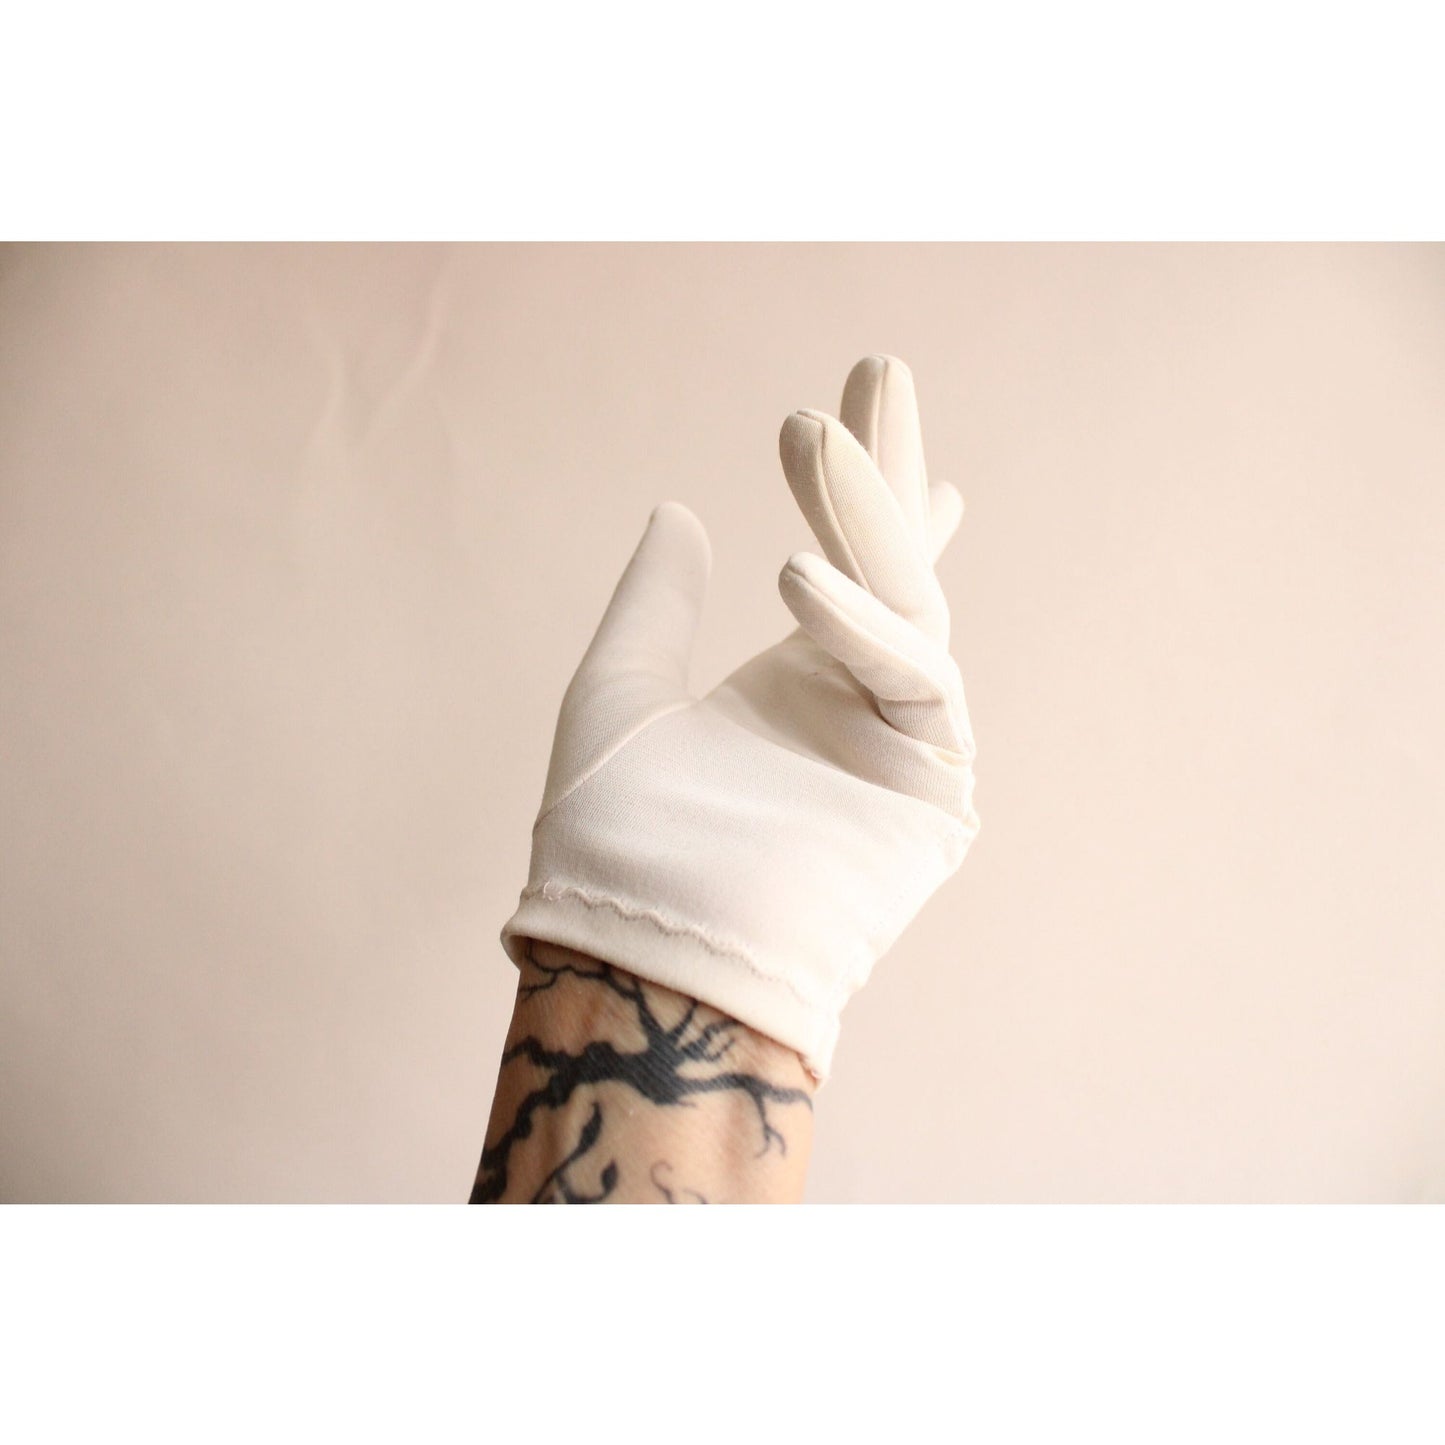 Vintage 1960s Gloves With Stitching